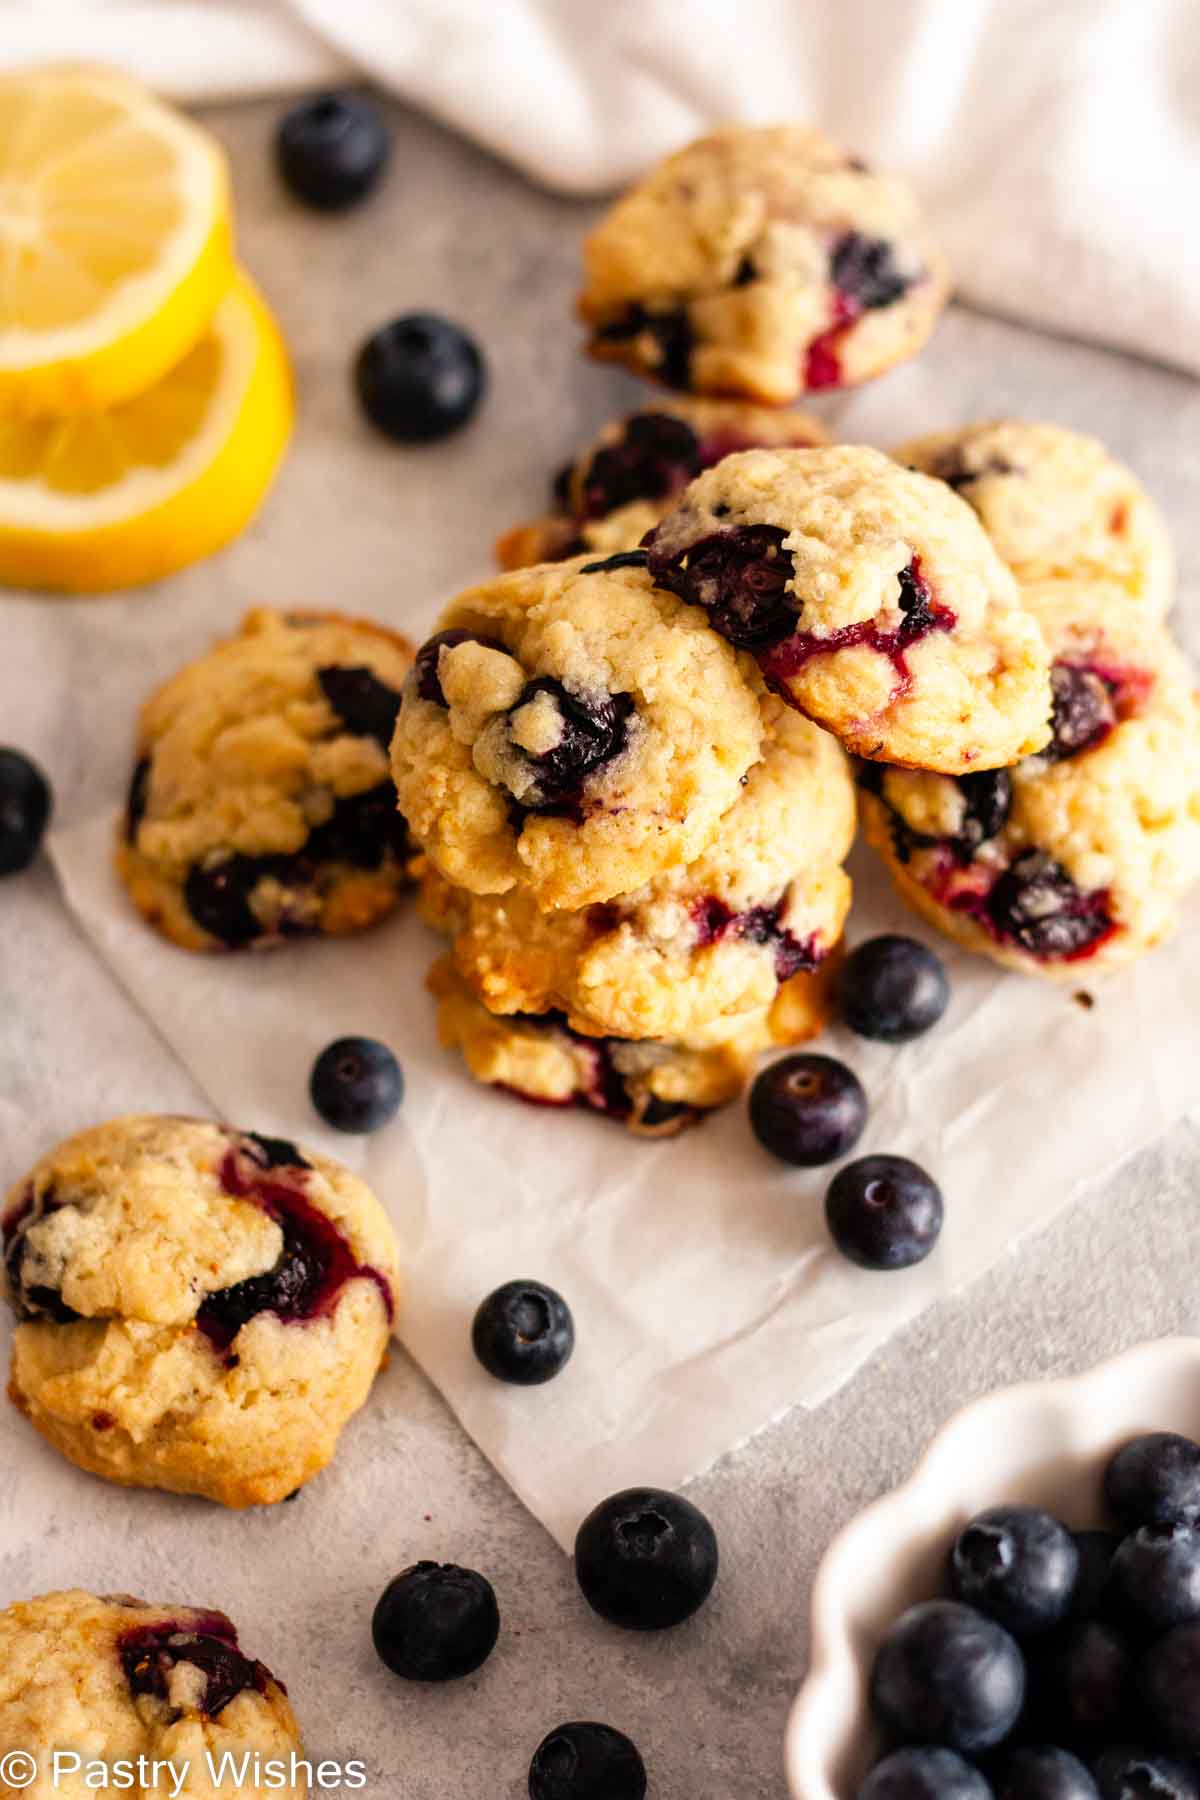 A stack of lemon blueberry cookies on parchment paper next to a bowl of blueberries and sliced lemons.